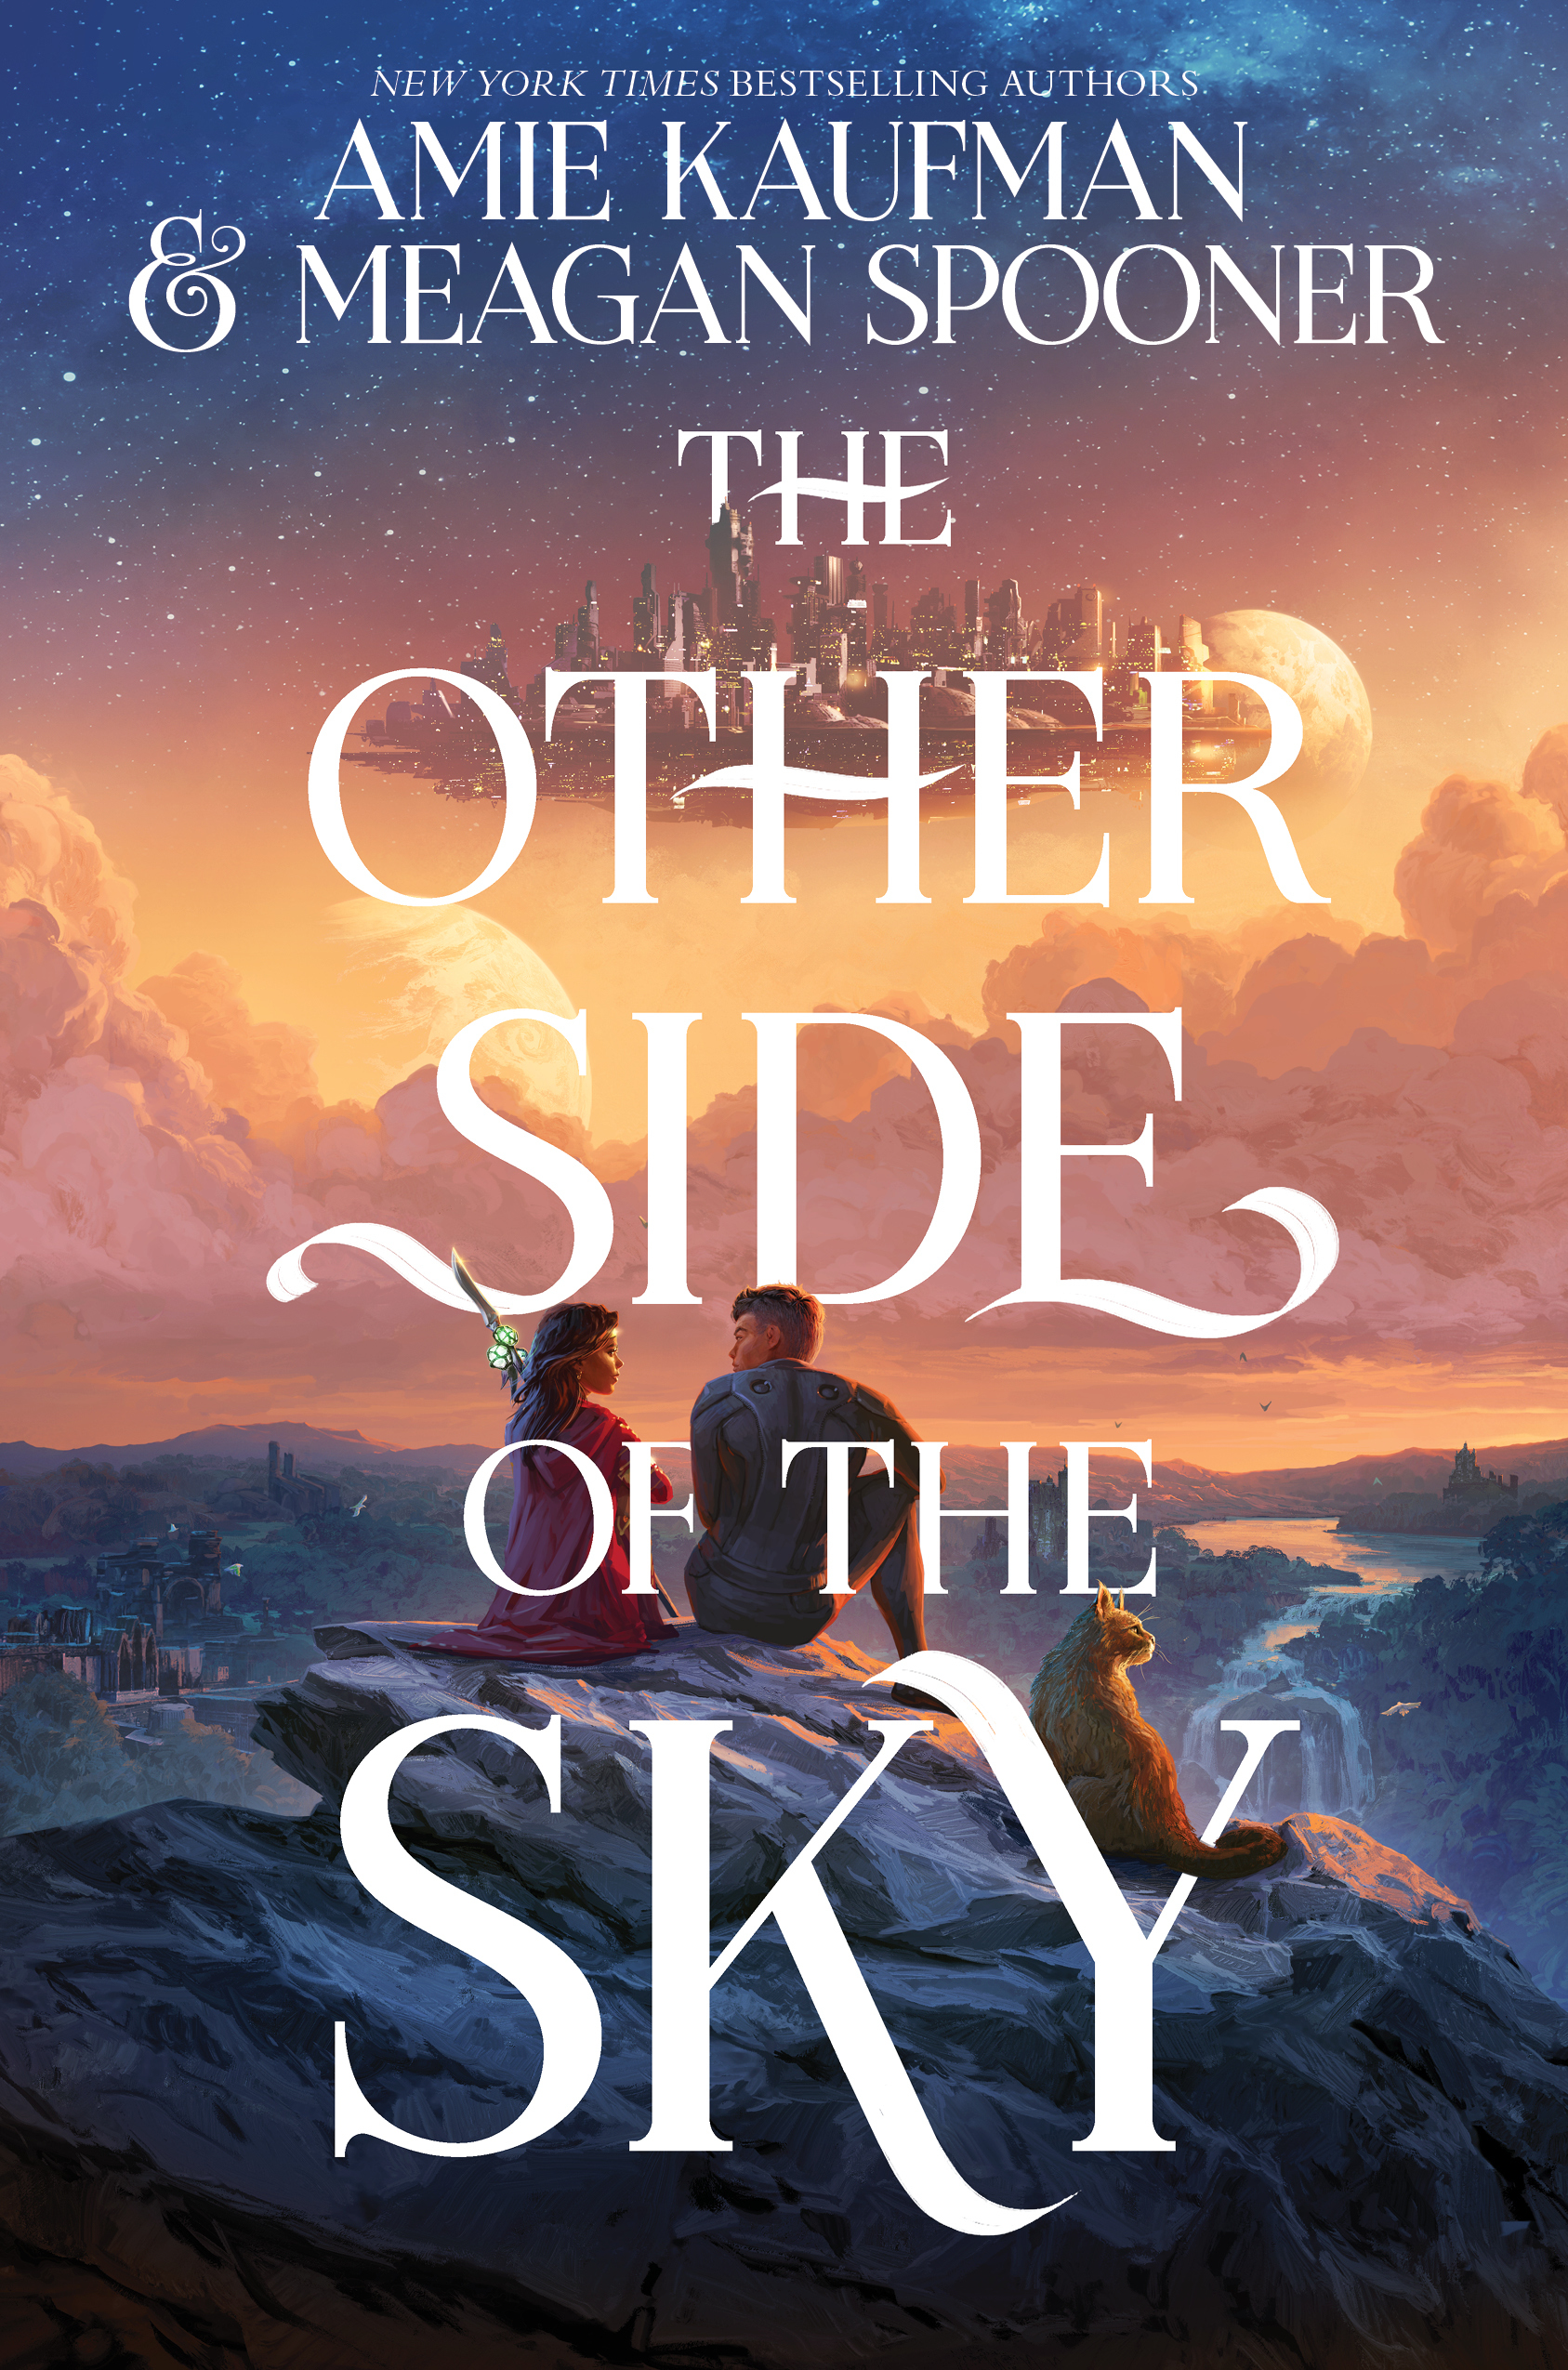 Meagan Spooner, Amie Kaufman: The Other Side of the Sky (2020, HarperCollins Publishers)